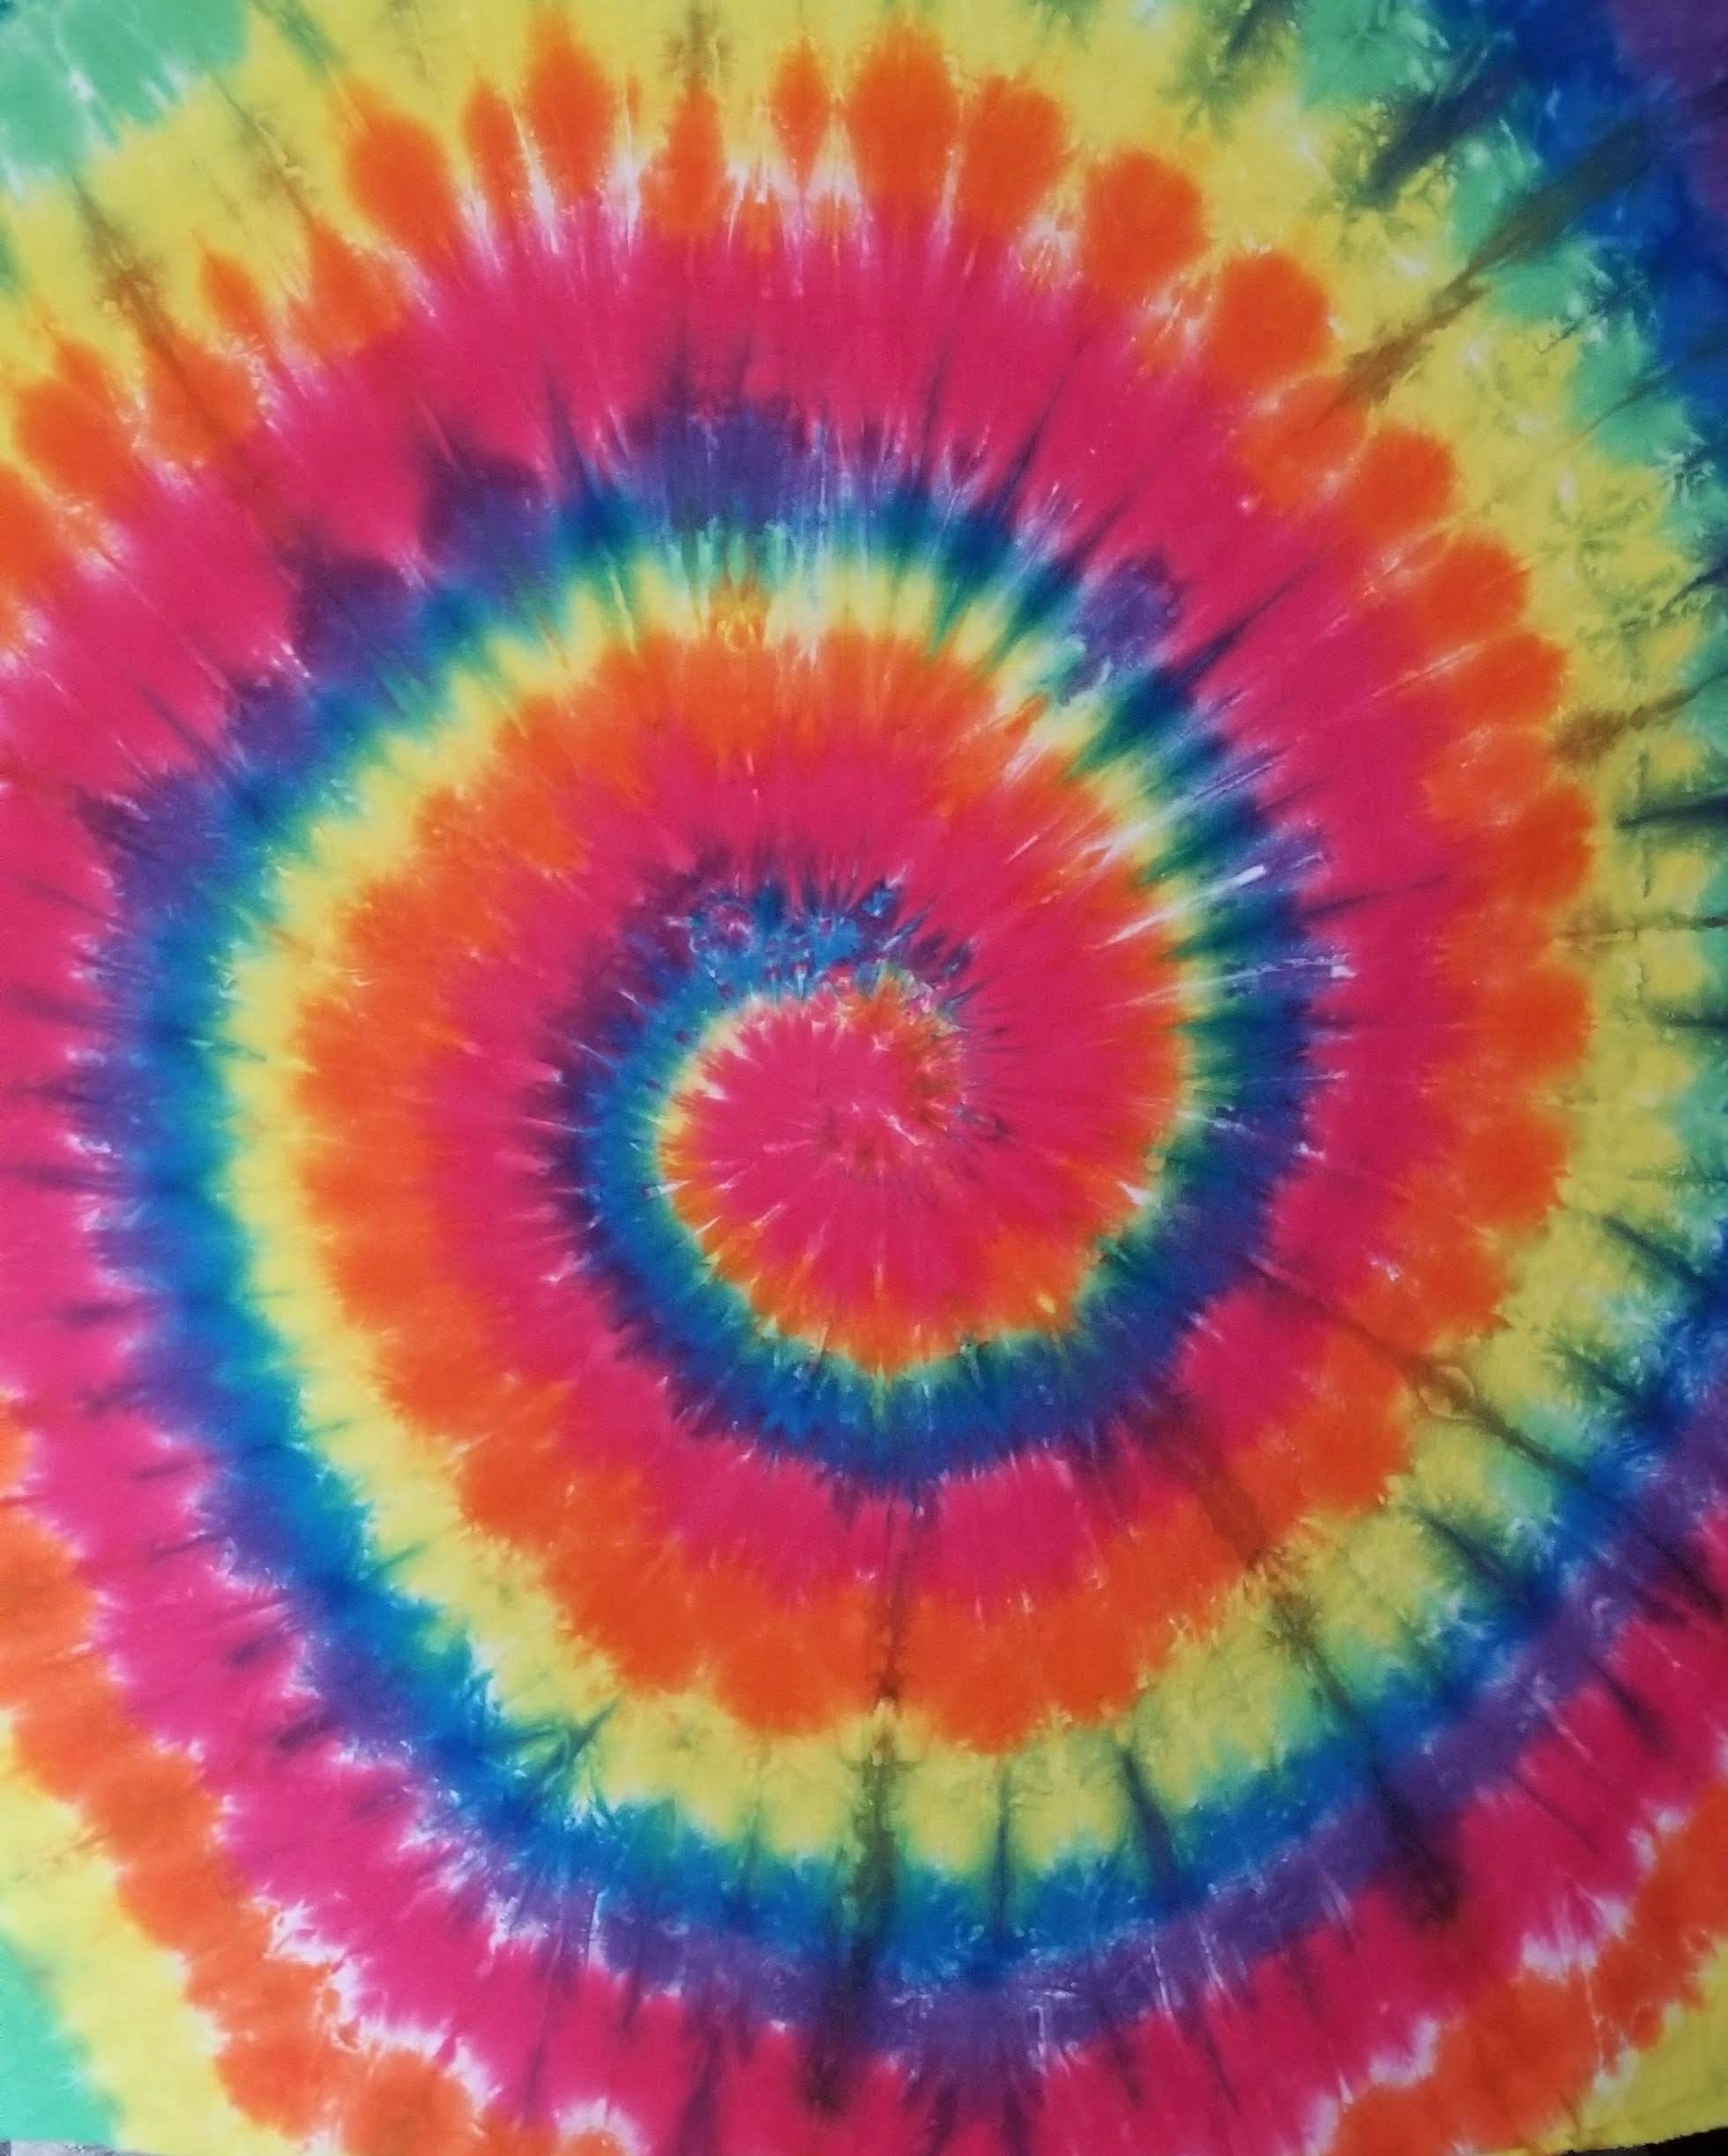 Tye Dye Wishes - Tie Dye, Handcrafted, Unique, One of a Kind Clothing